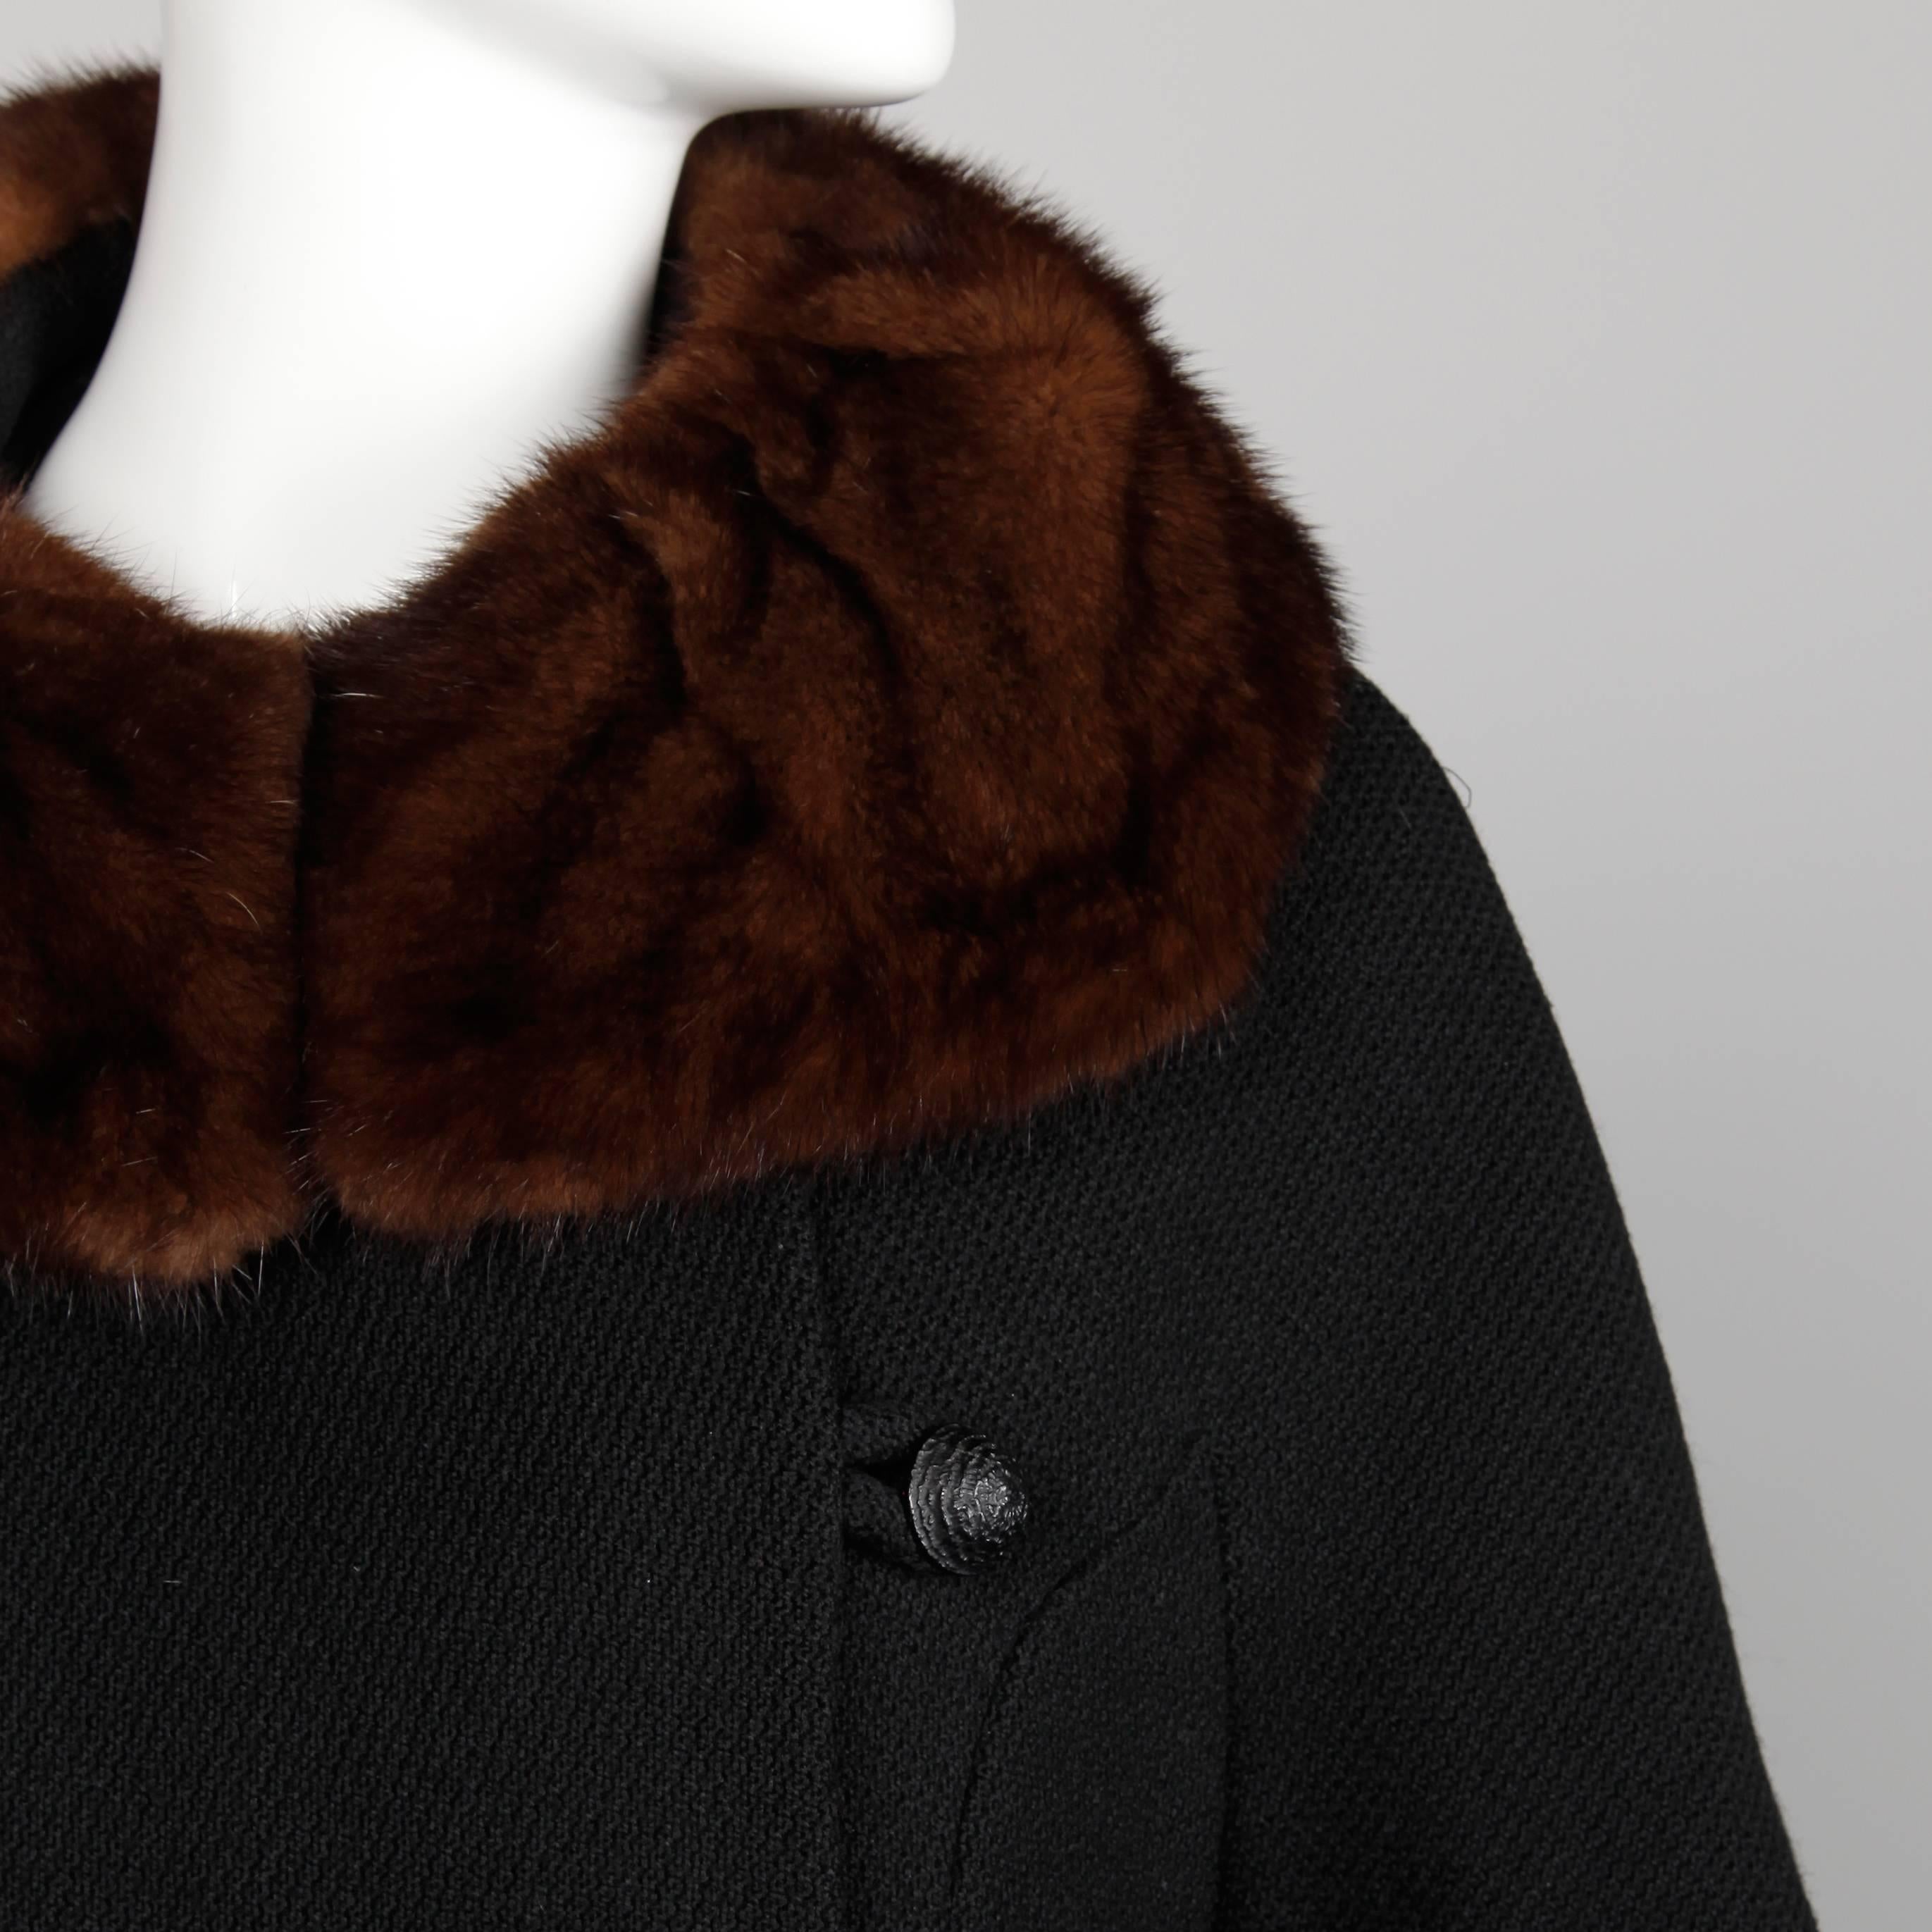 Vintage Black Wool Asymmetric Coat with Brown Mink Fur Collar, 1960s  In Excellent Condition For Sale In Sparks, NV